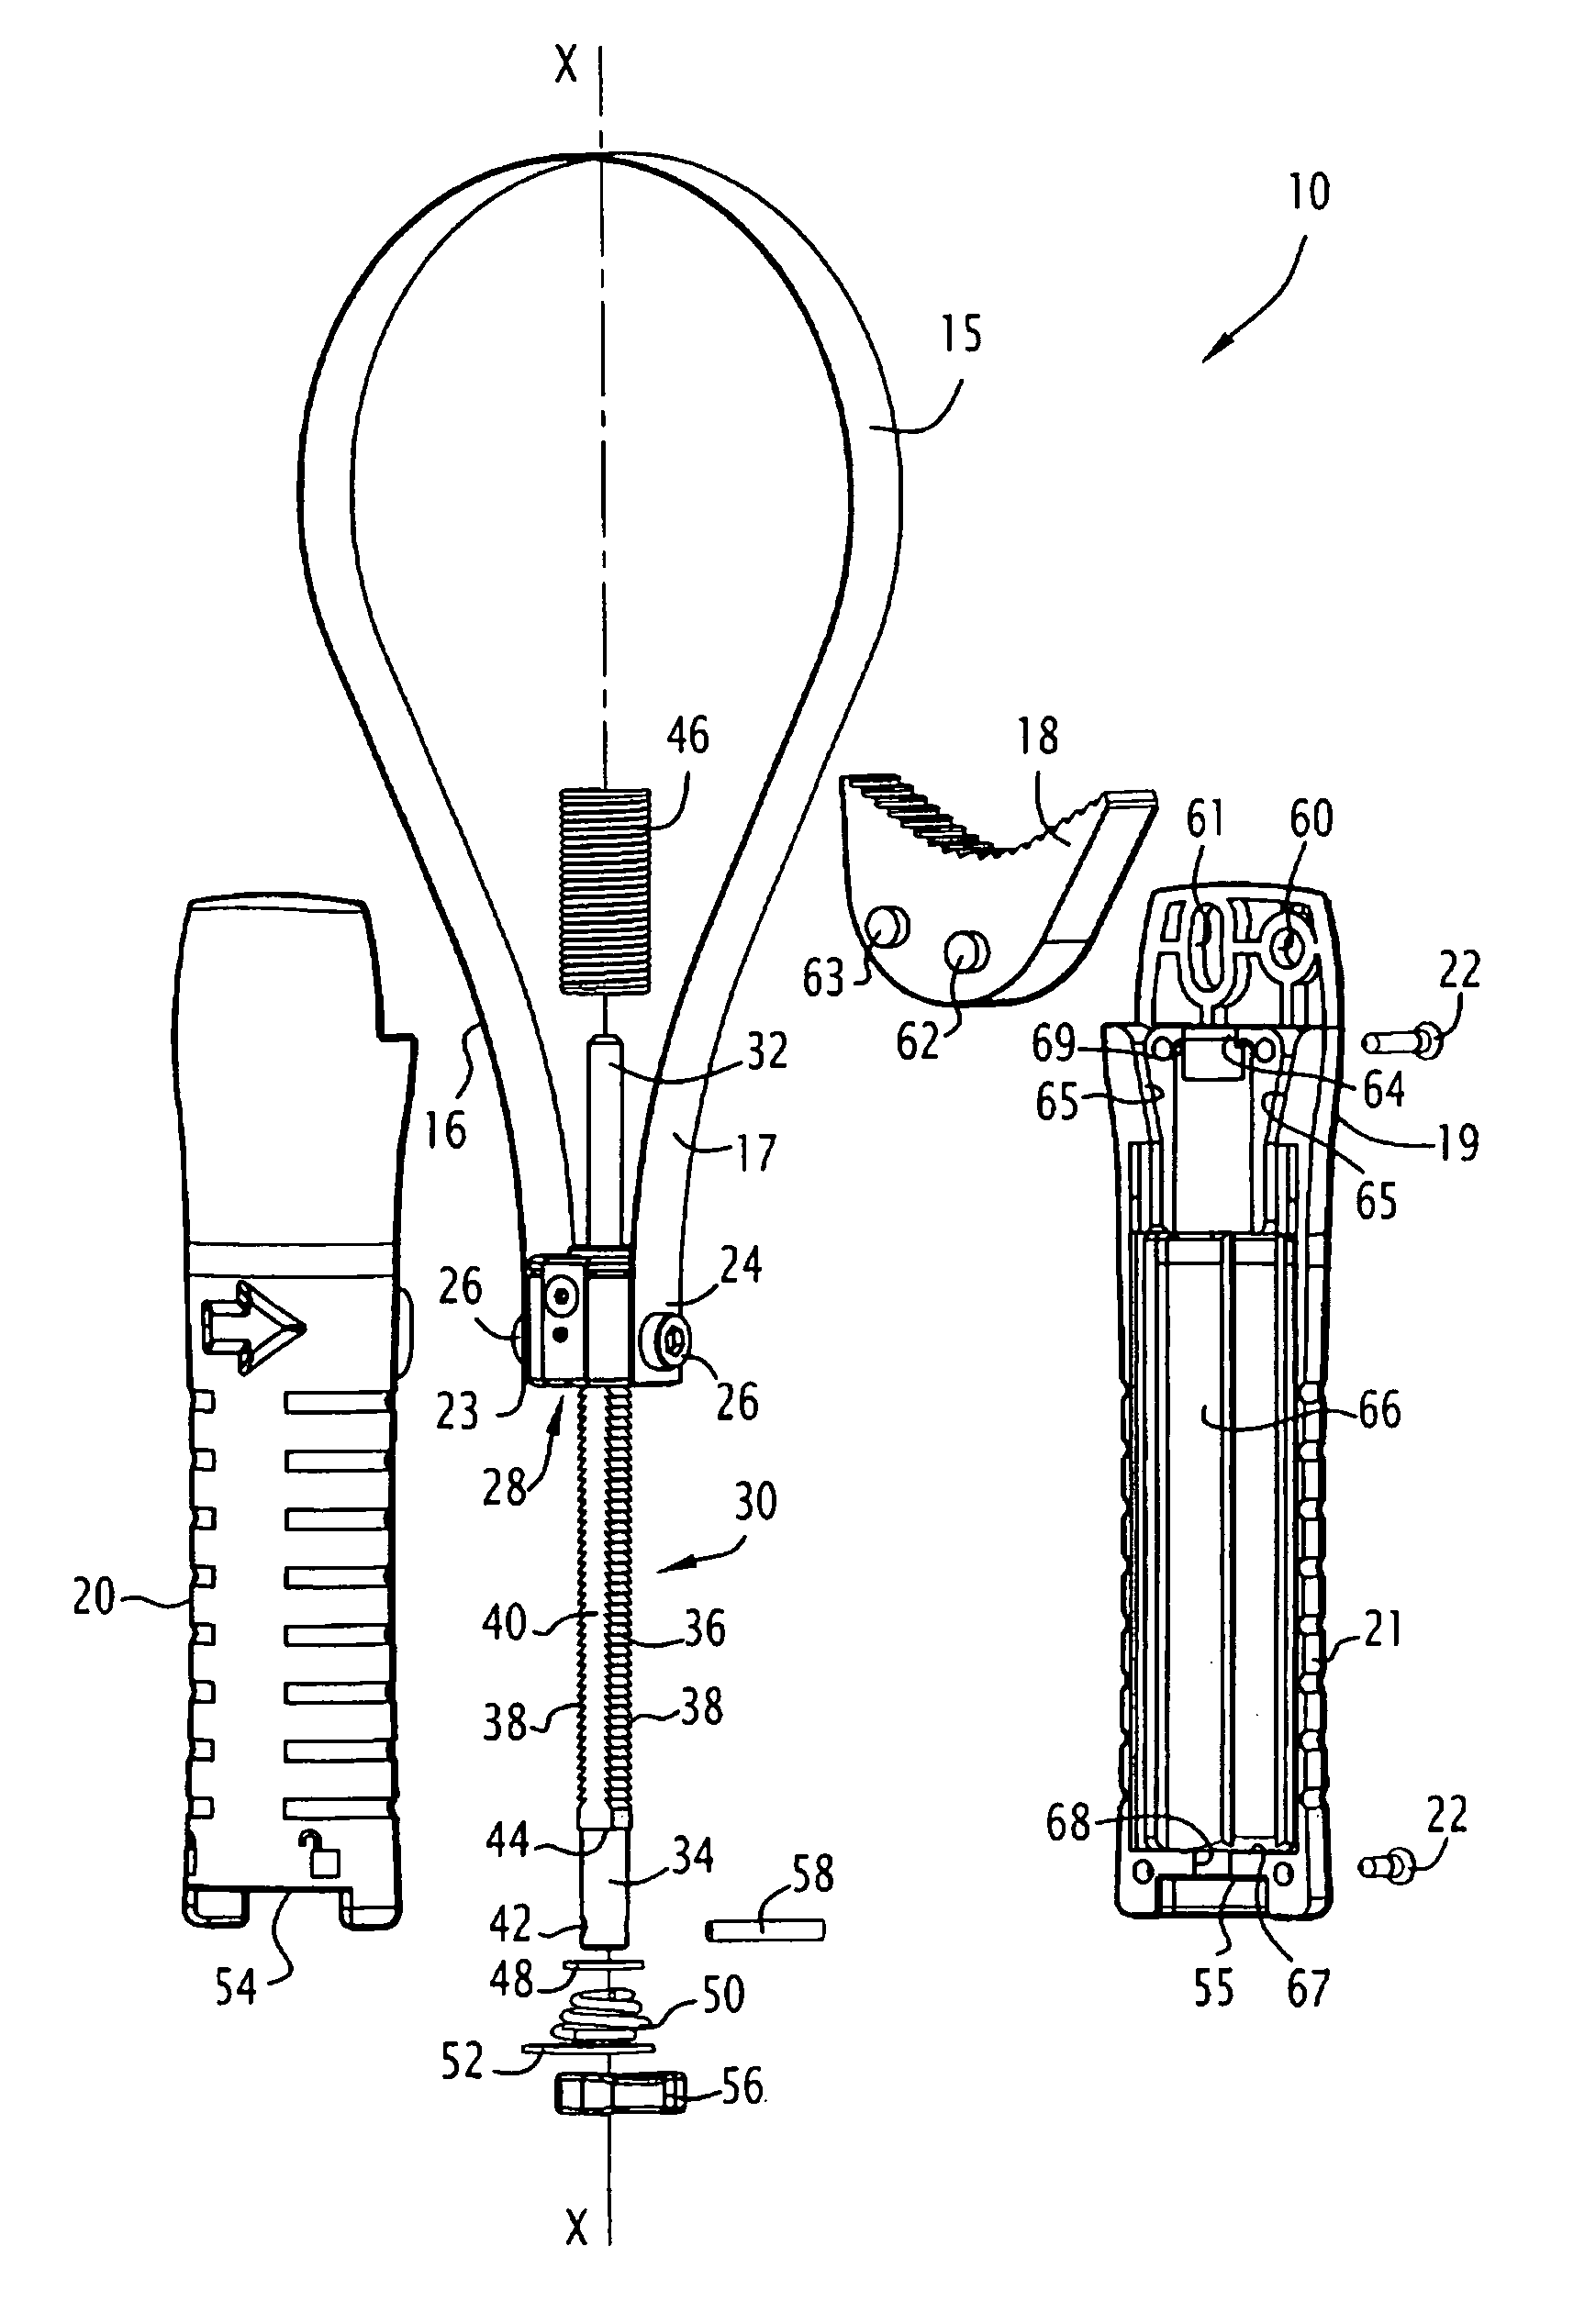 Strap pipe wrench for driving an object having a generally cylindrical shape